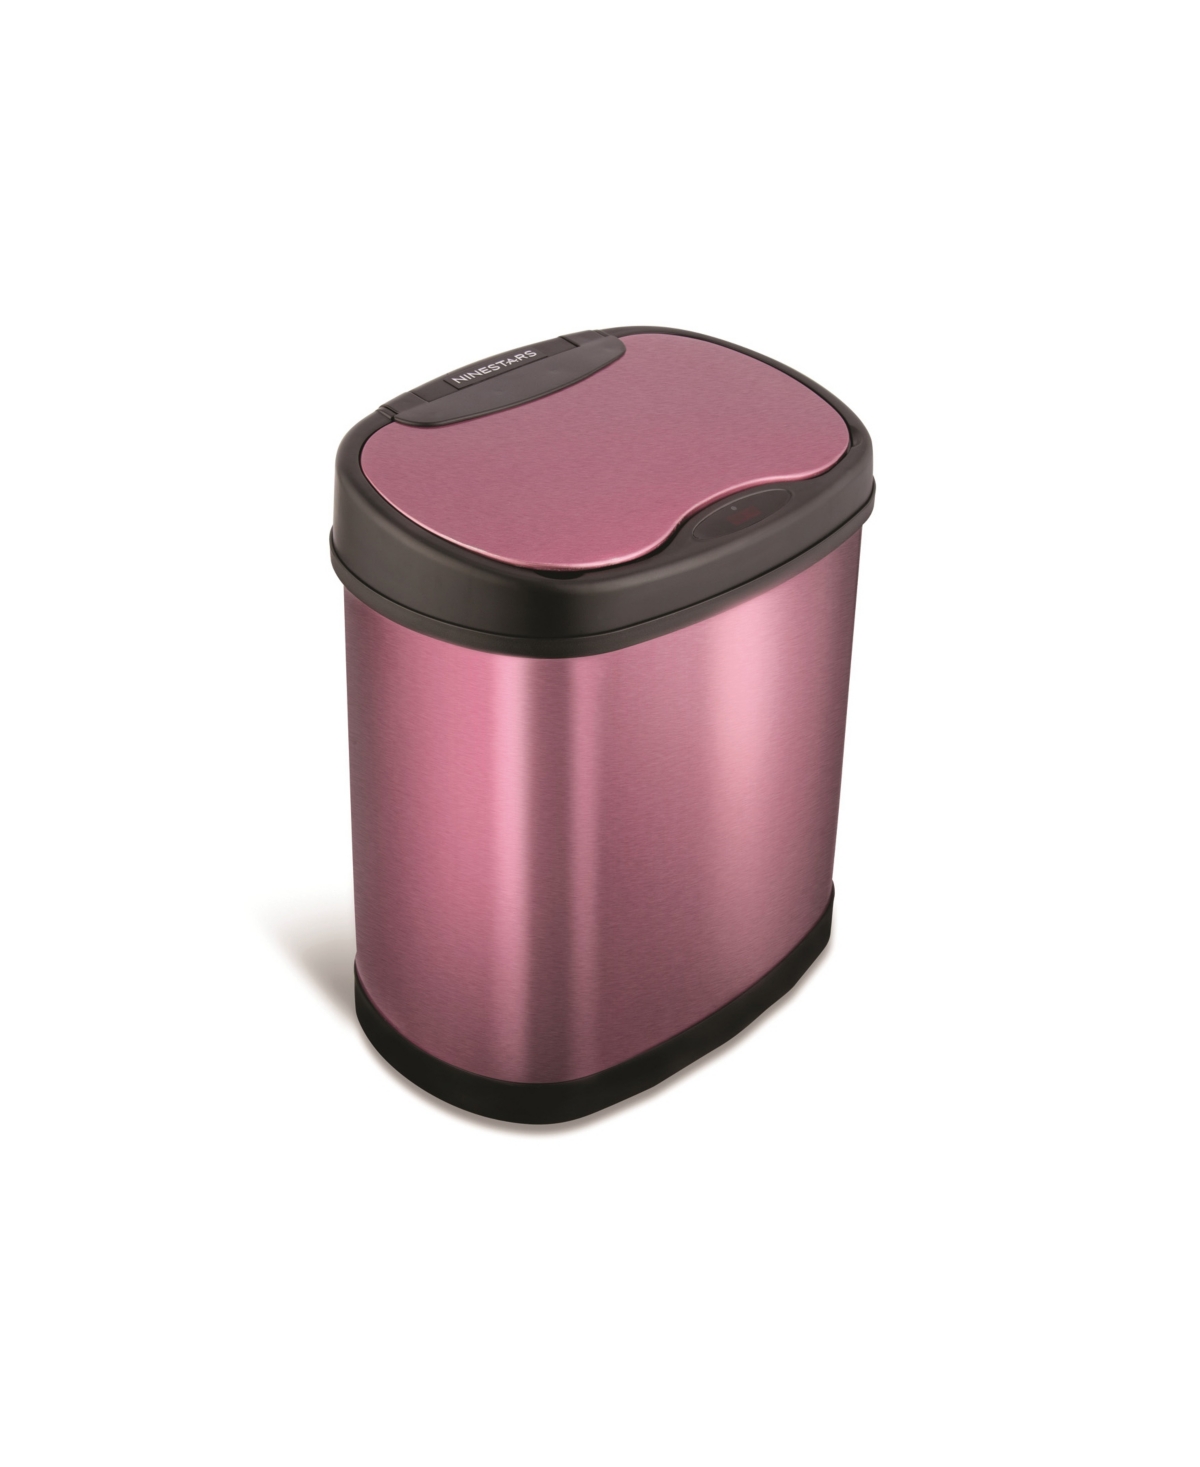 Stainless Steel 3.2 Gallons Motion Sensor Trash Can - Burgundy